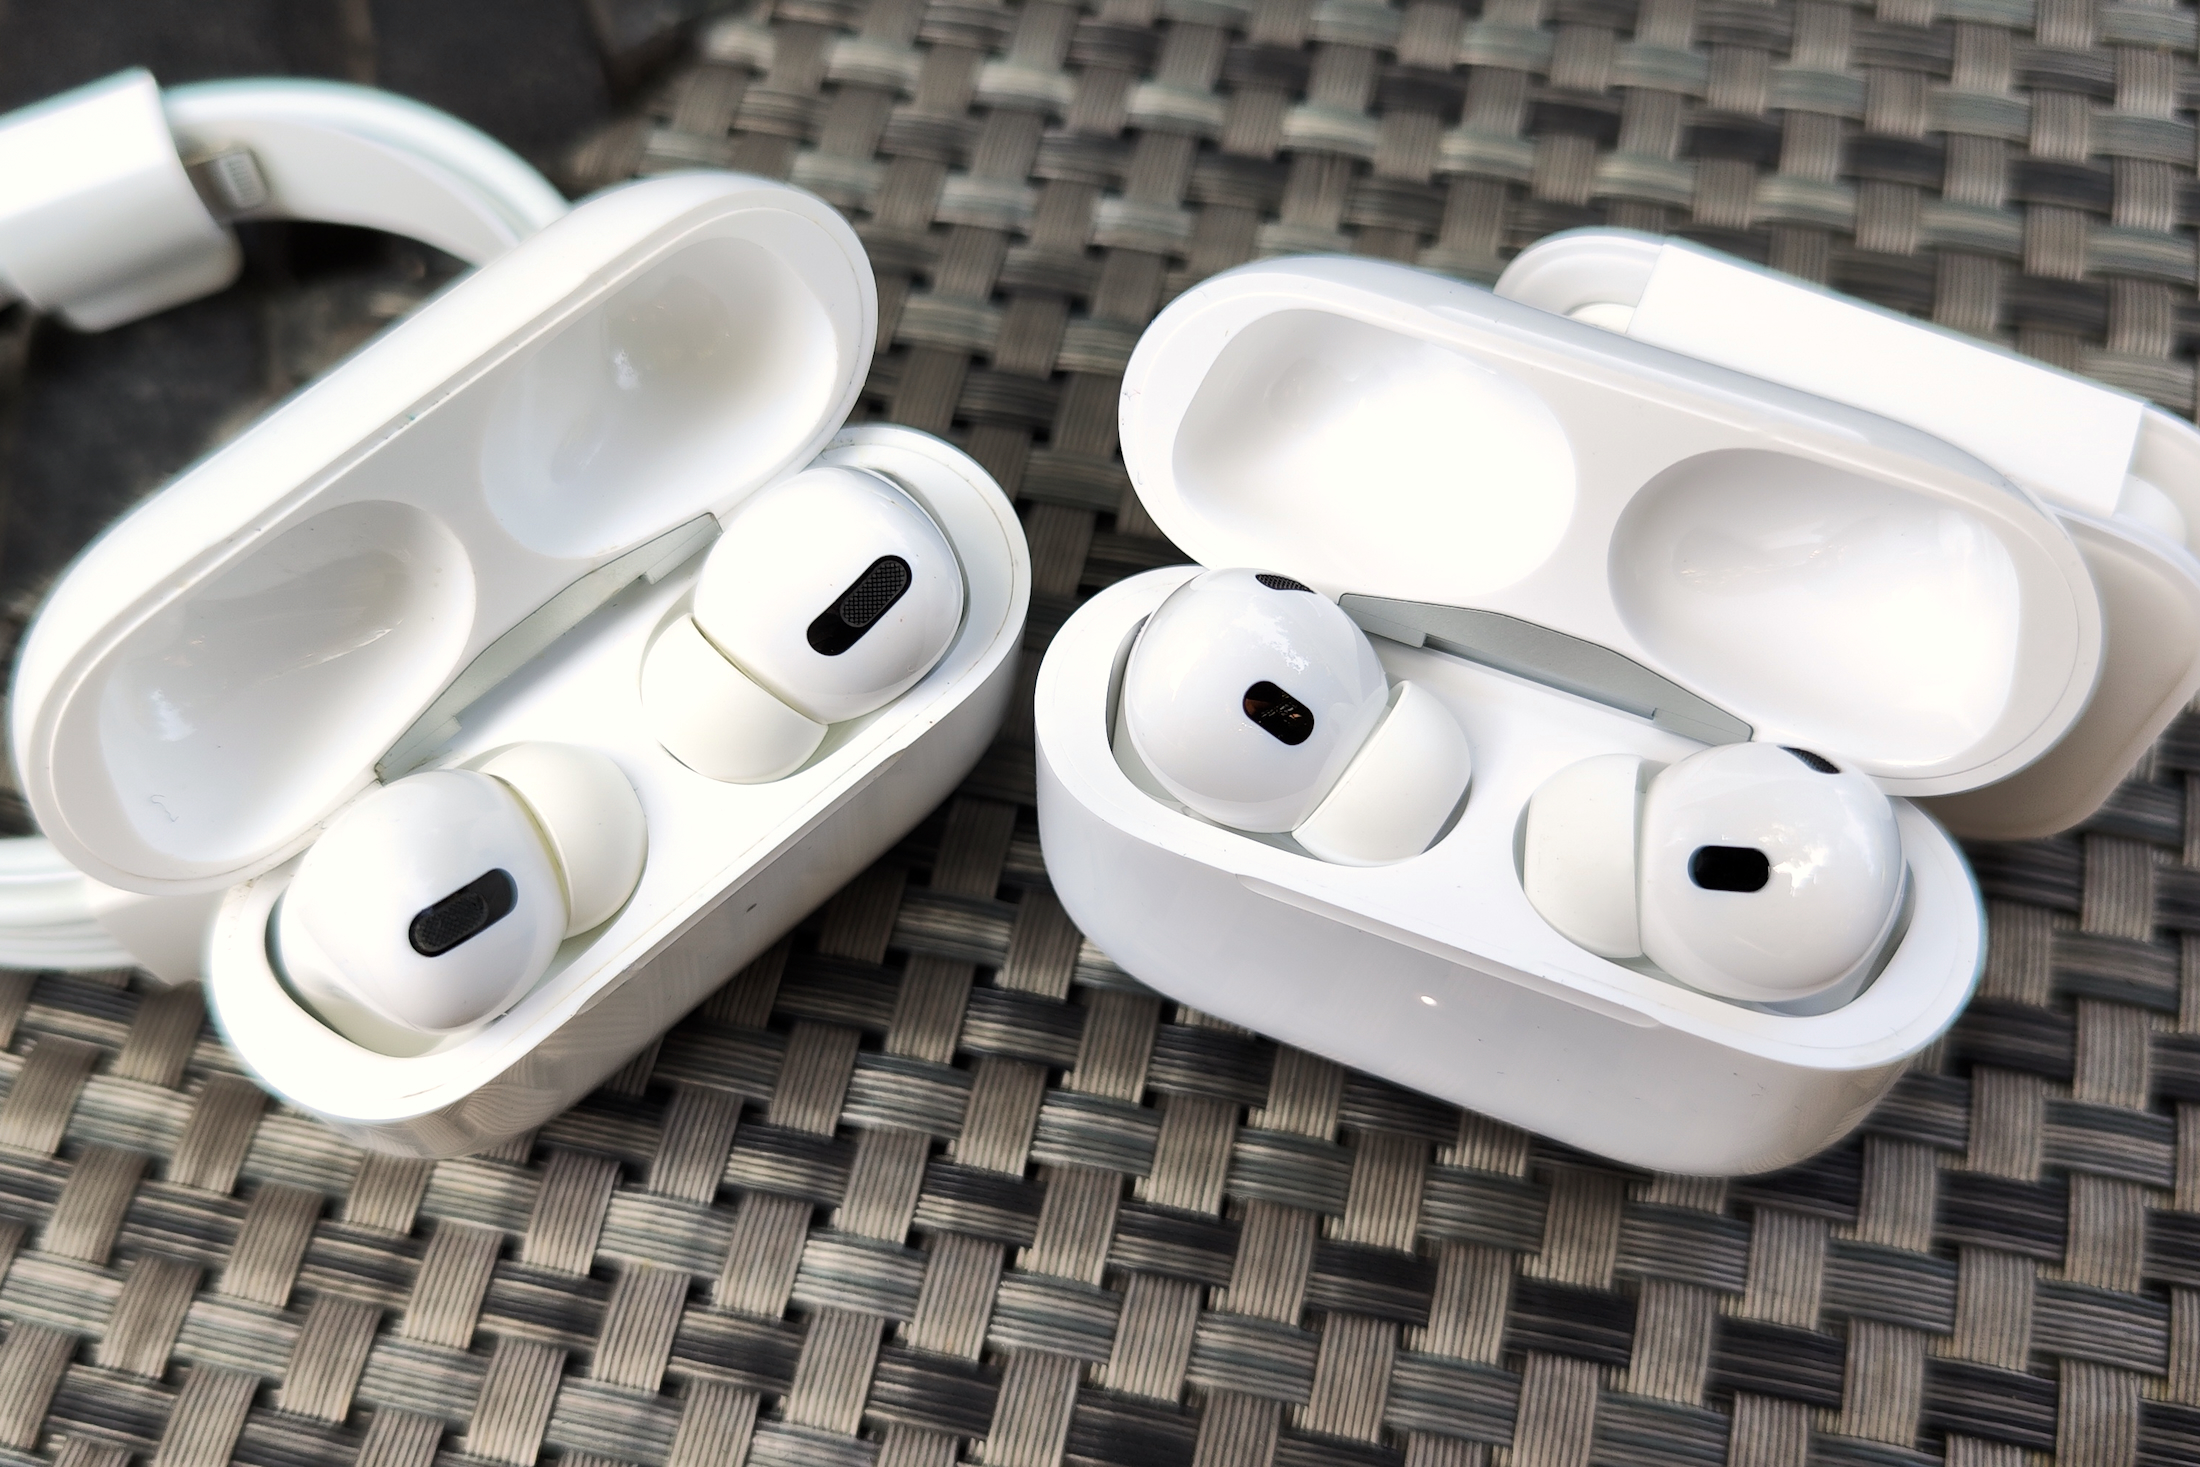 Apple AirPods Pro 2 vs. AirPods Pro: What's new?